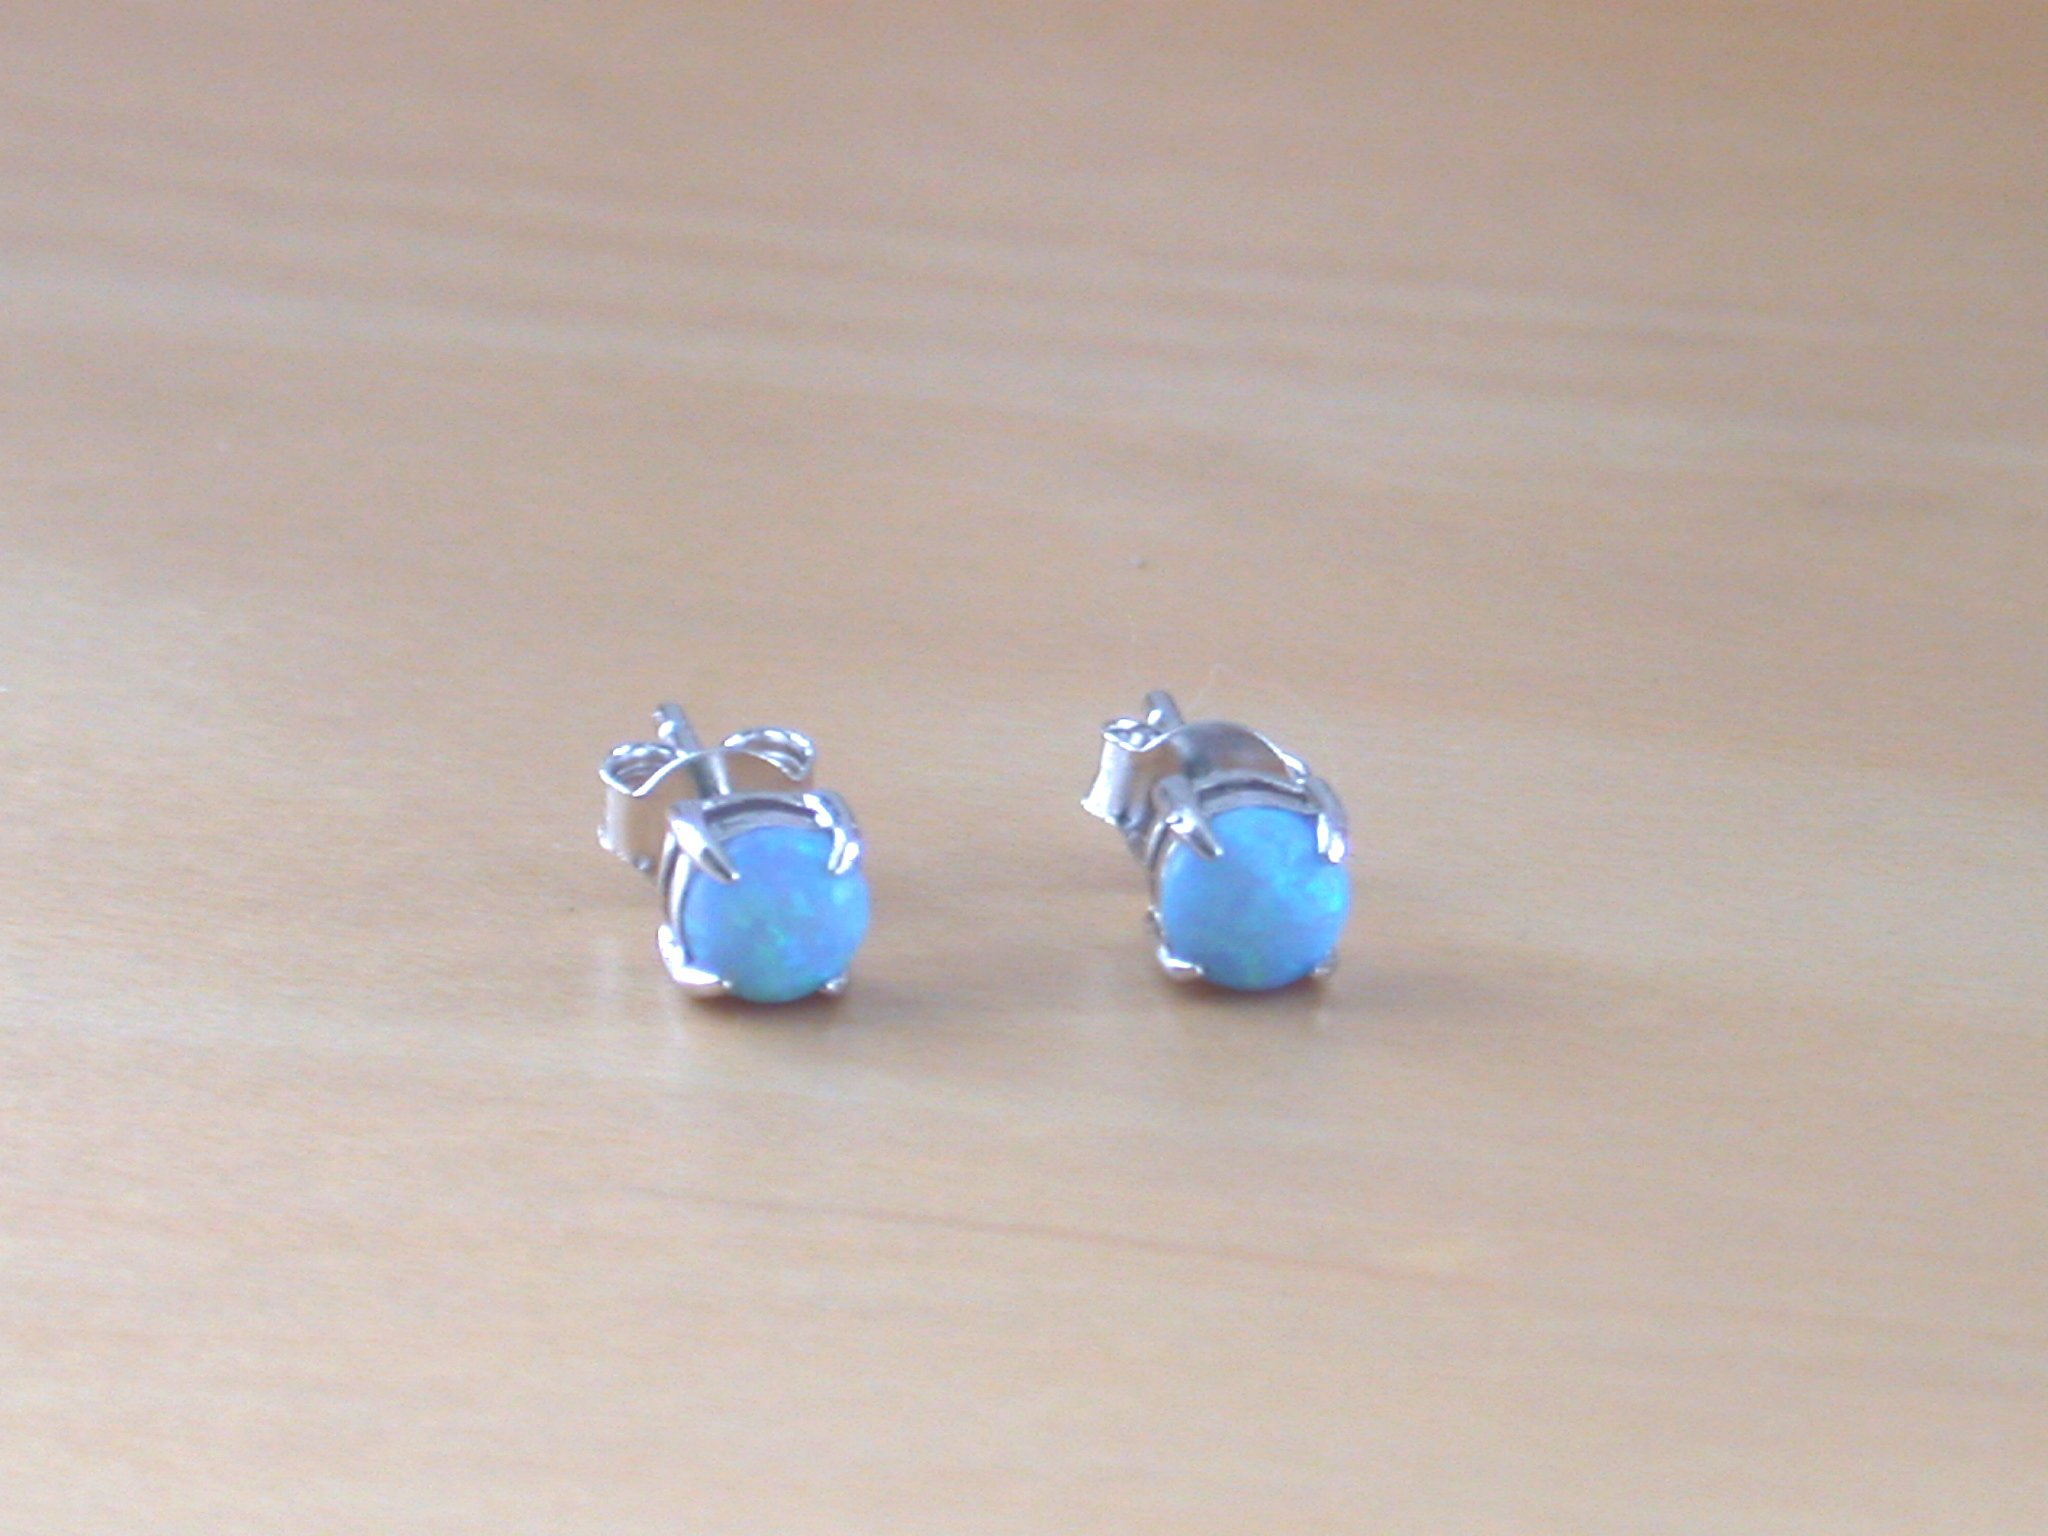 Sterling Silver Earrings with White and Blue Stones- Desically Ethnic